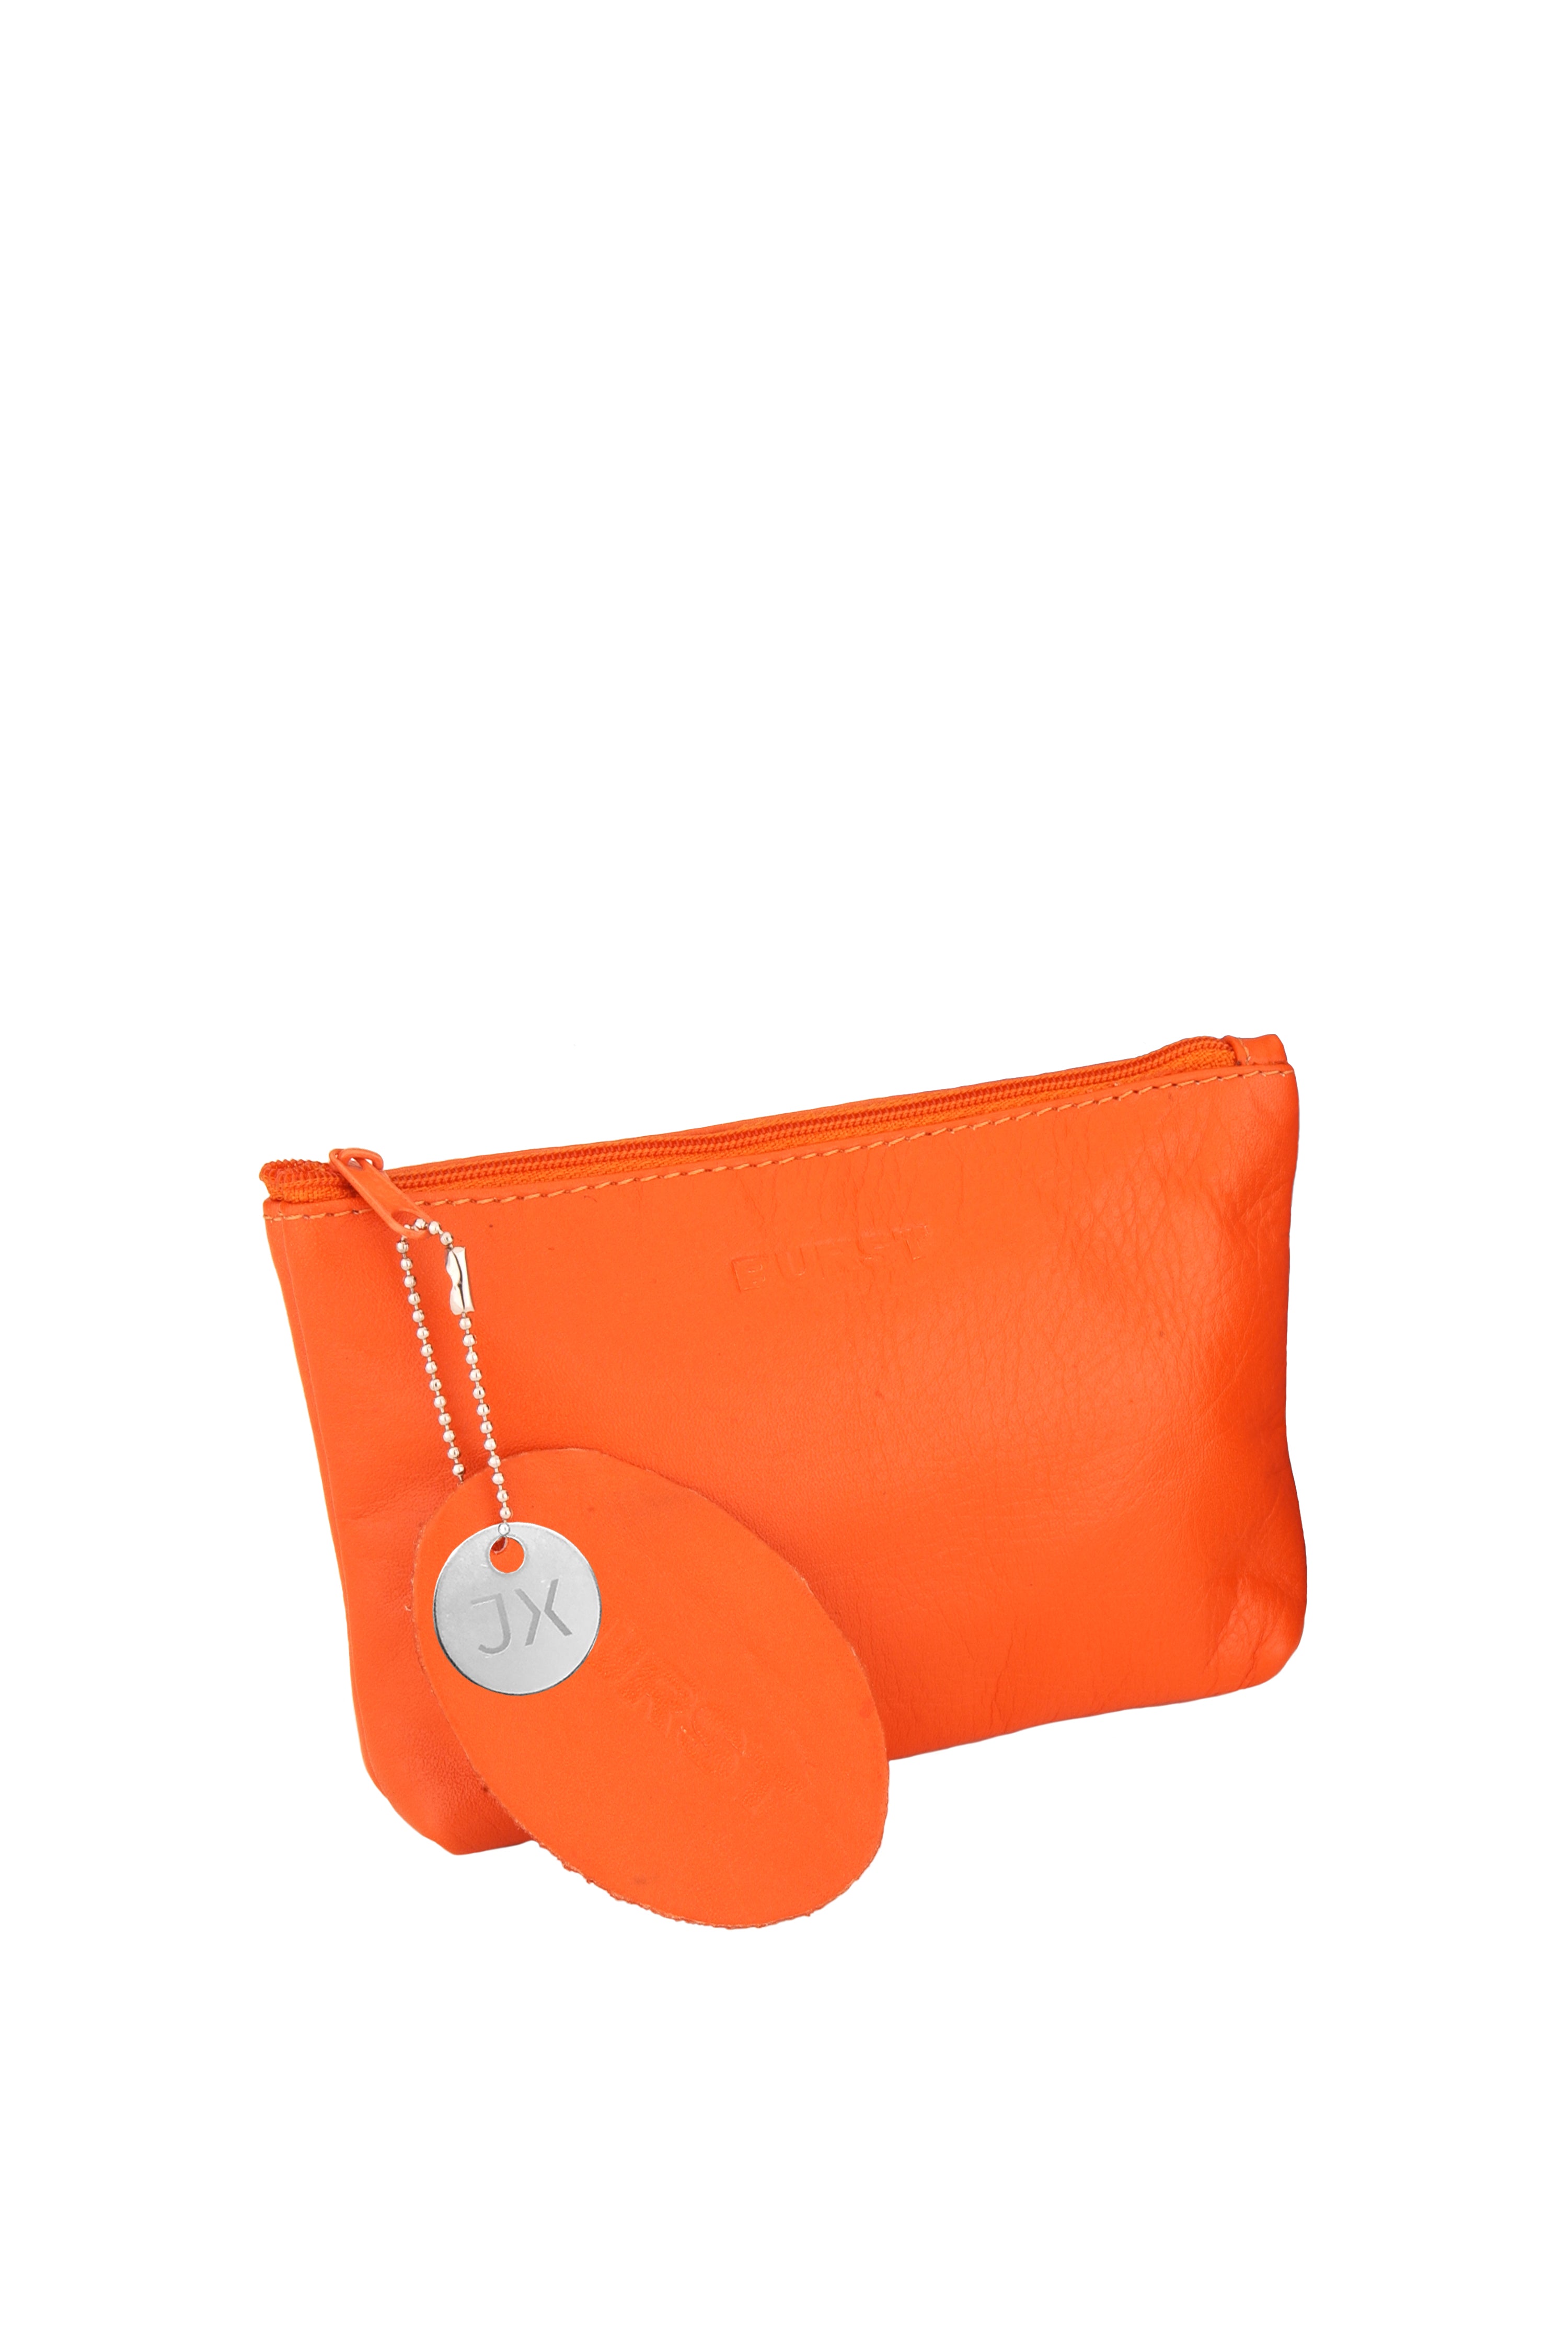 Leather pouch, zip closure. Vivid orange with light orange lining and stitch. Removable branded leather tab with metal coin tags. Upcycled, sustainable.